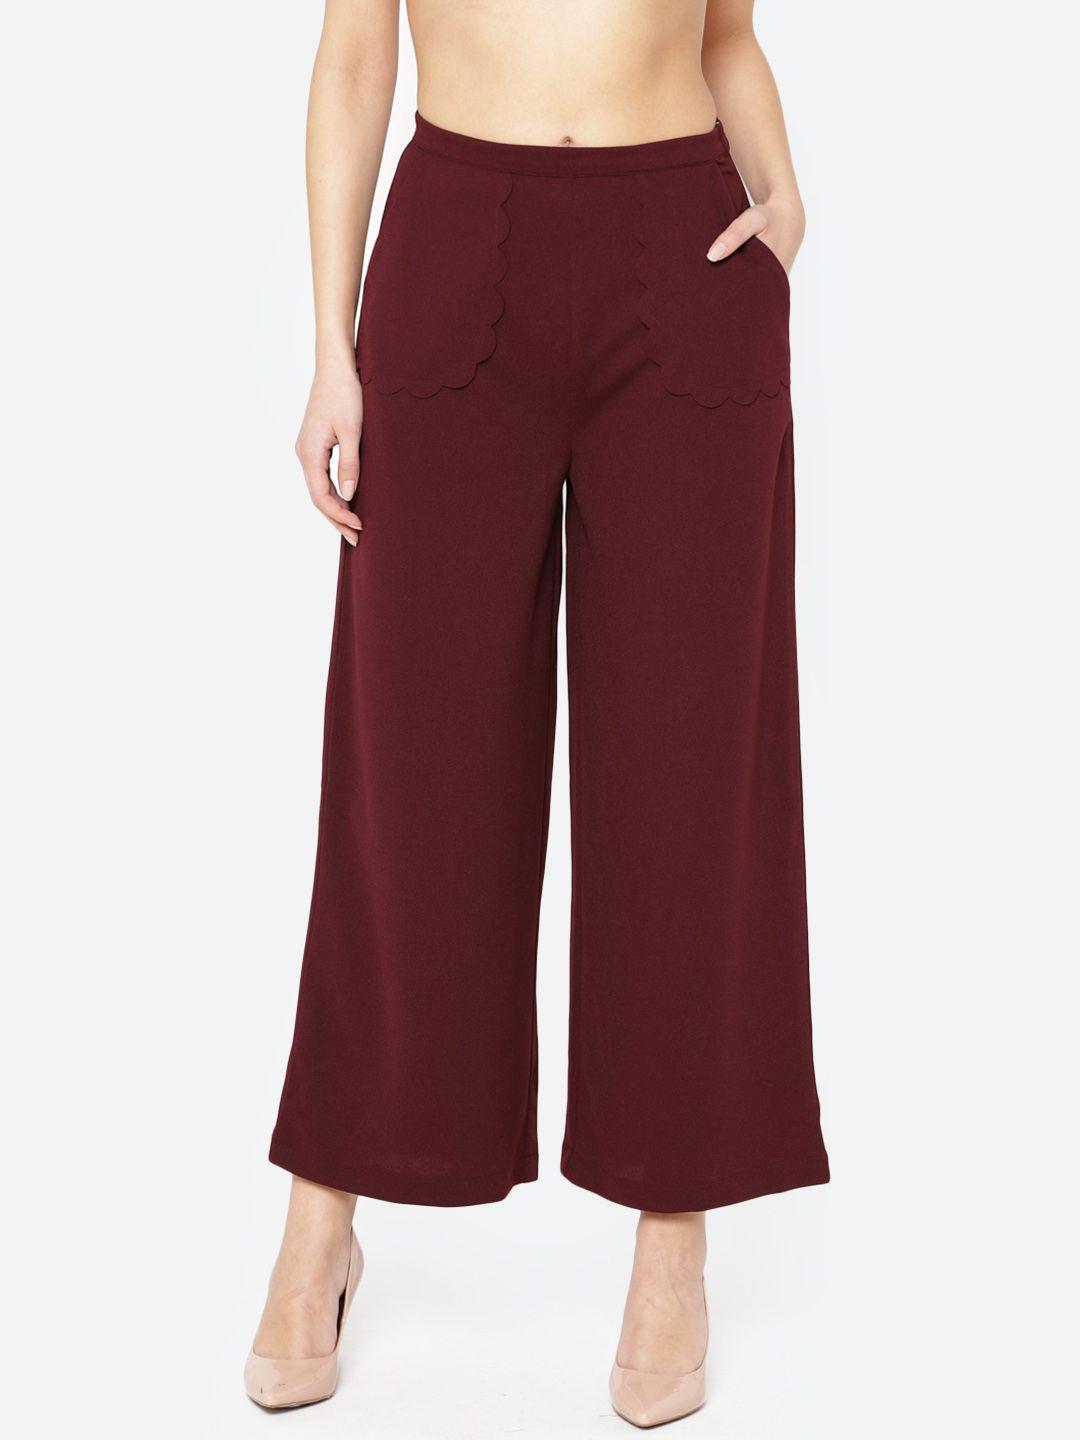 carlton-london-women-burgundy-straight-fit-solid-parallel-trousers